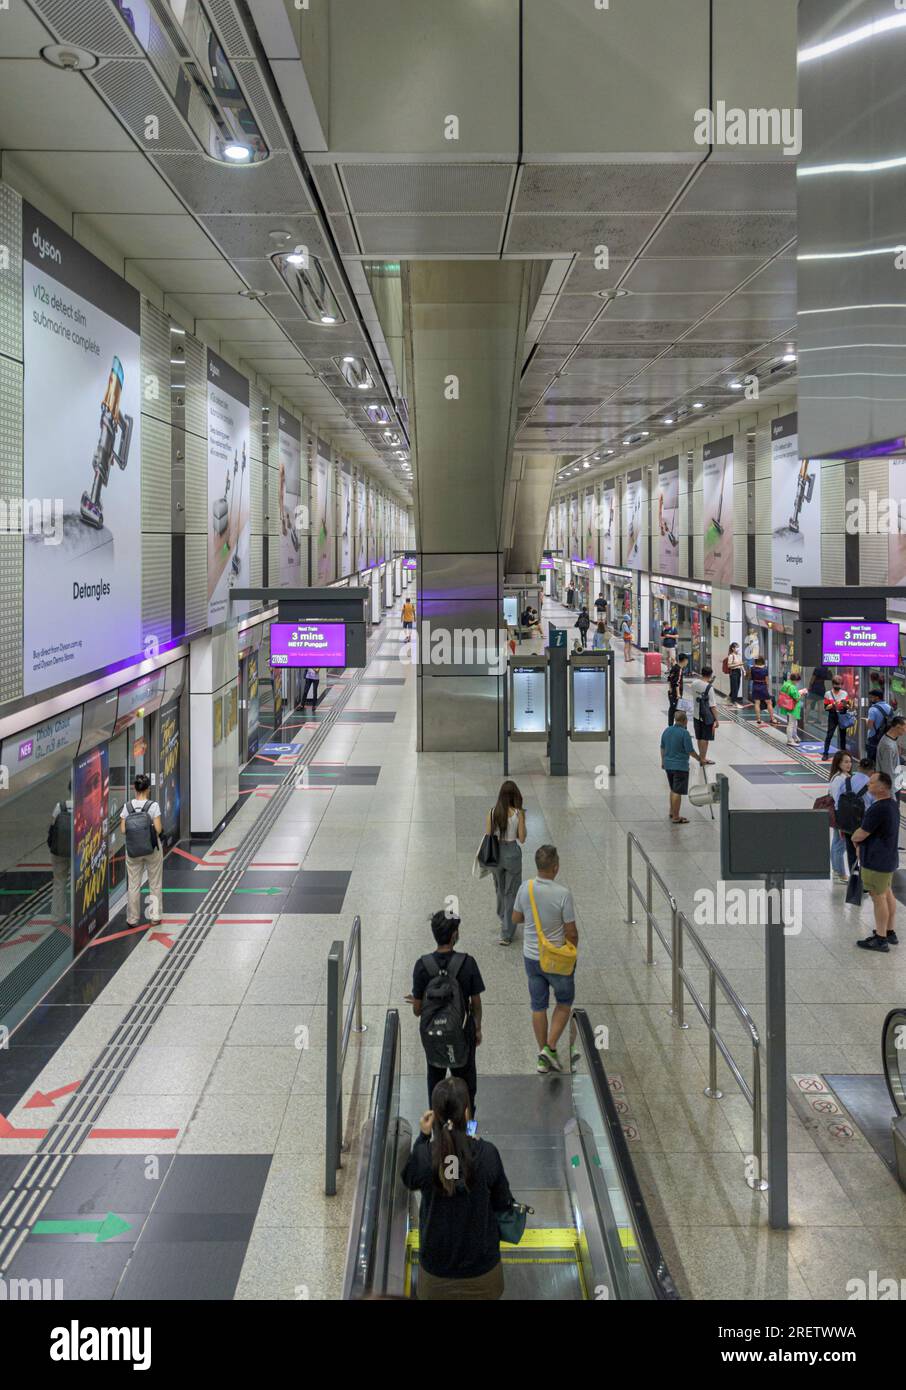 Inside the Dhoby Ghaut North East Line MRT underground station, Singapore Stock Photo